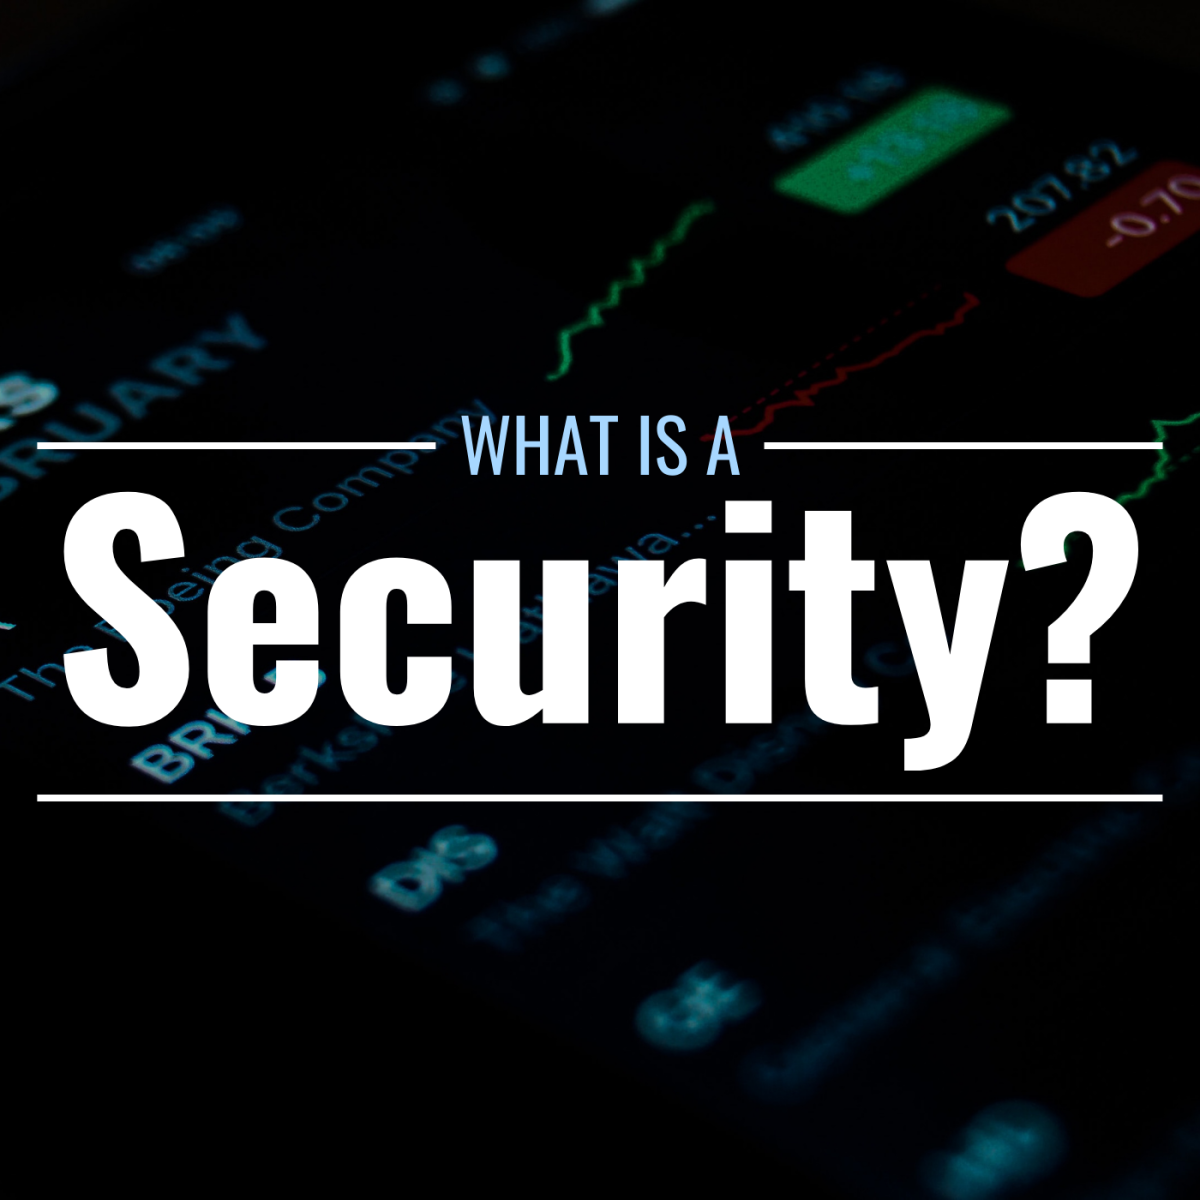 Darkened photo of digital stock portfolio on a screen with text overlay that reads "What Is a Security?"